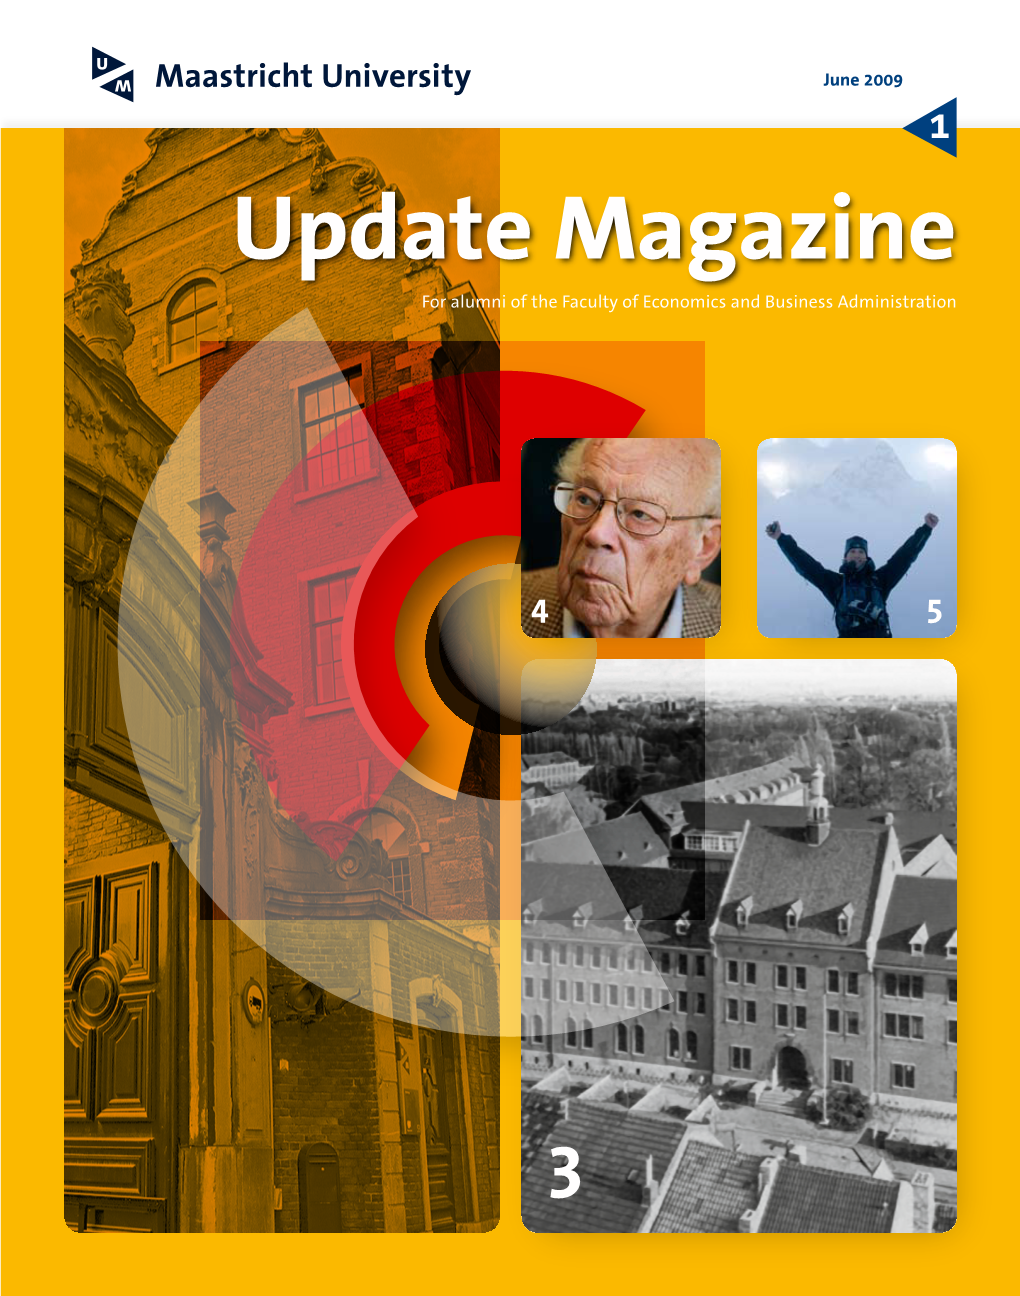 Update Magazine for Alumni of the Faculty of Economics and Business Administration